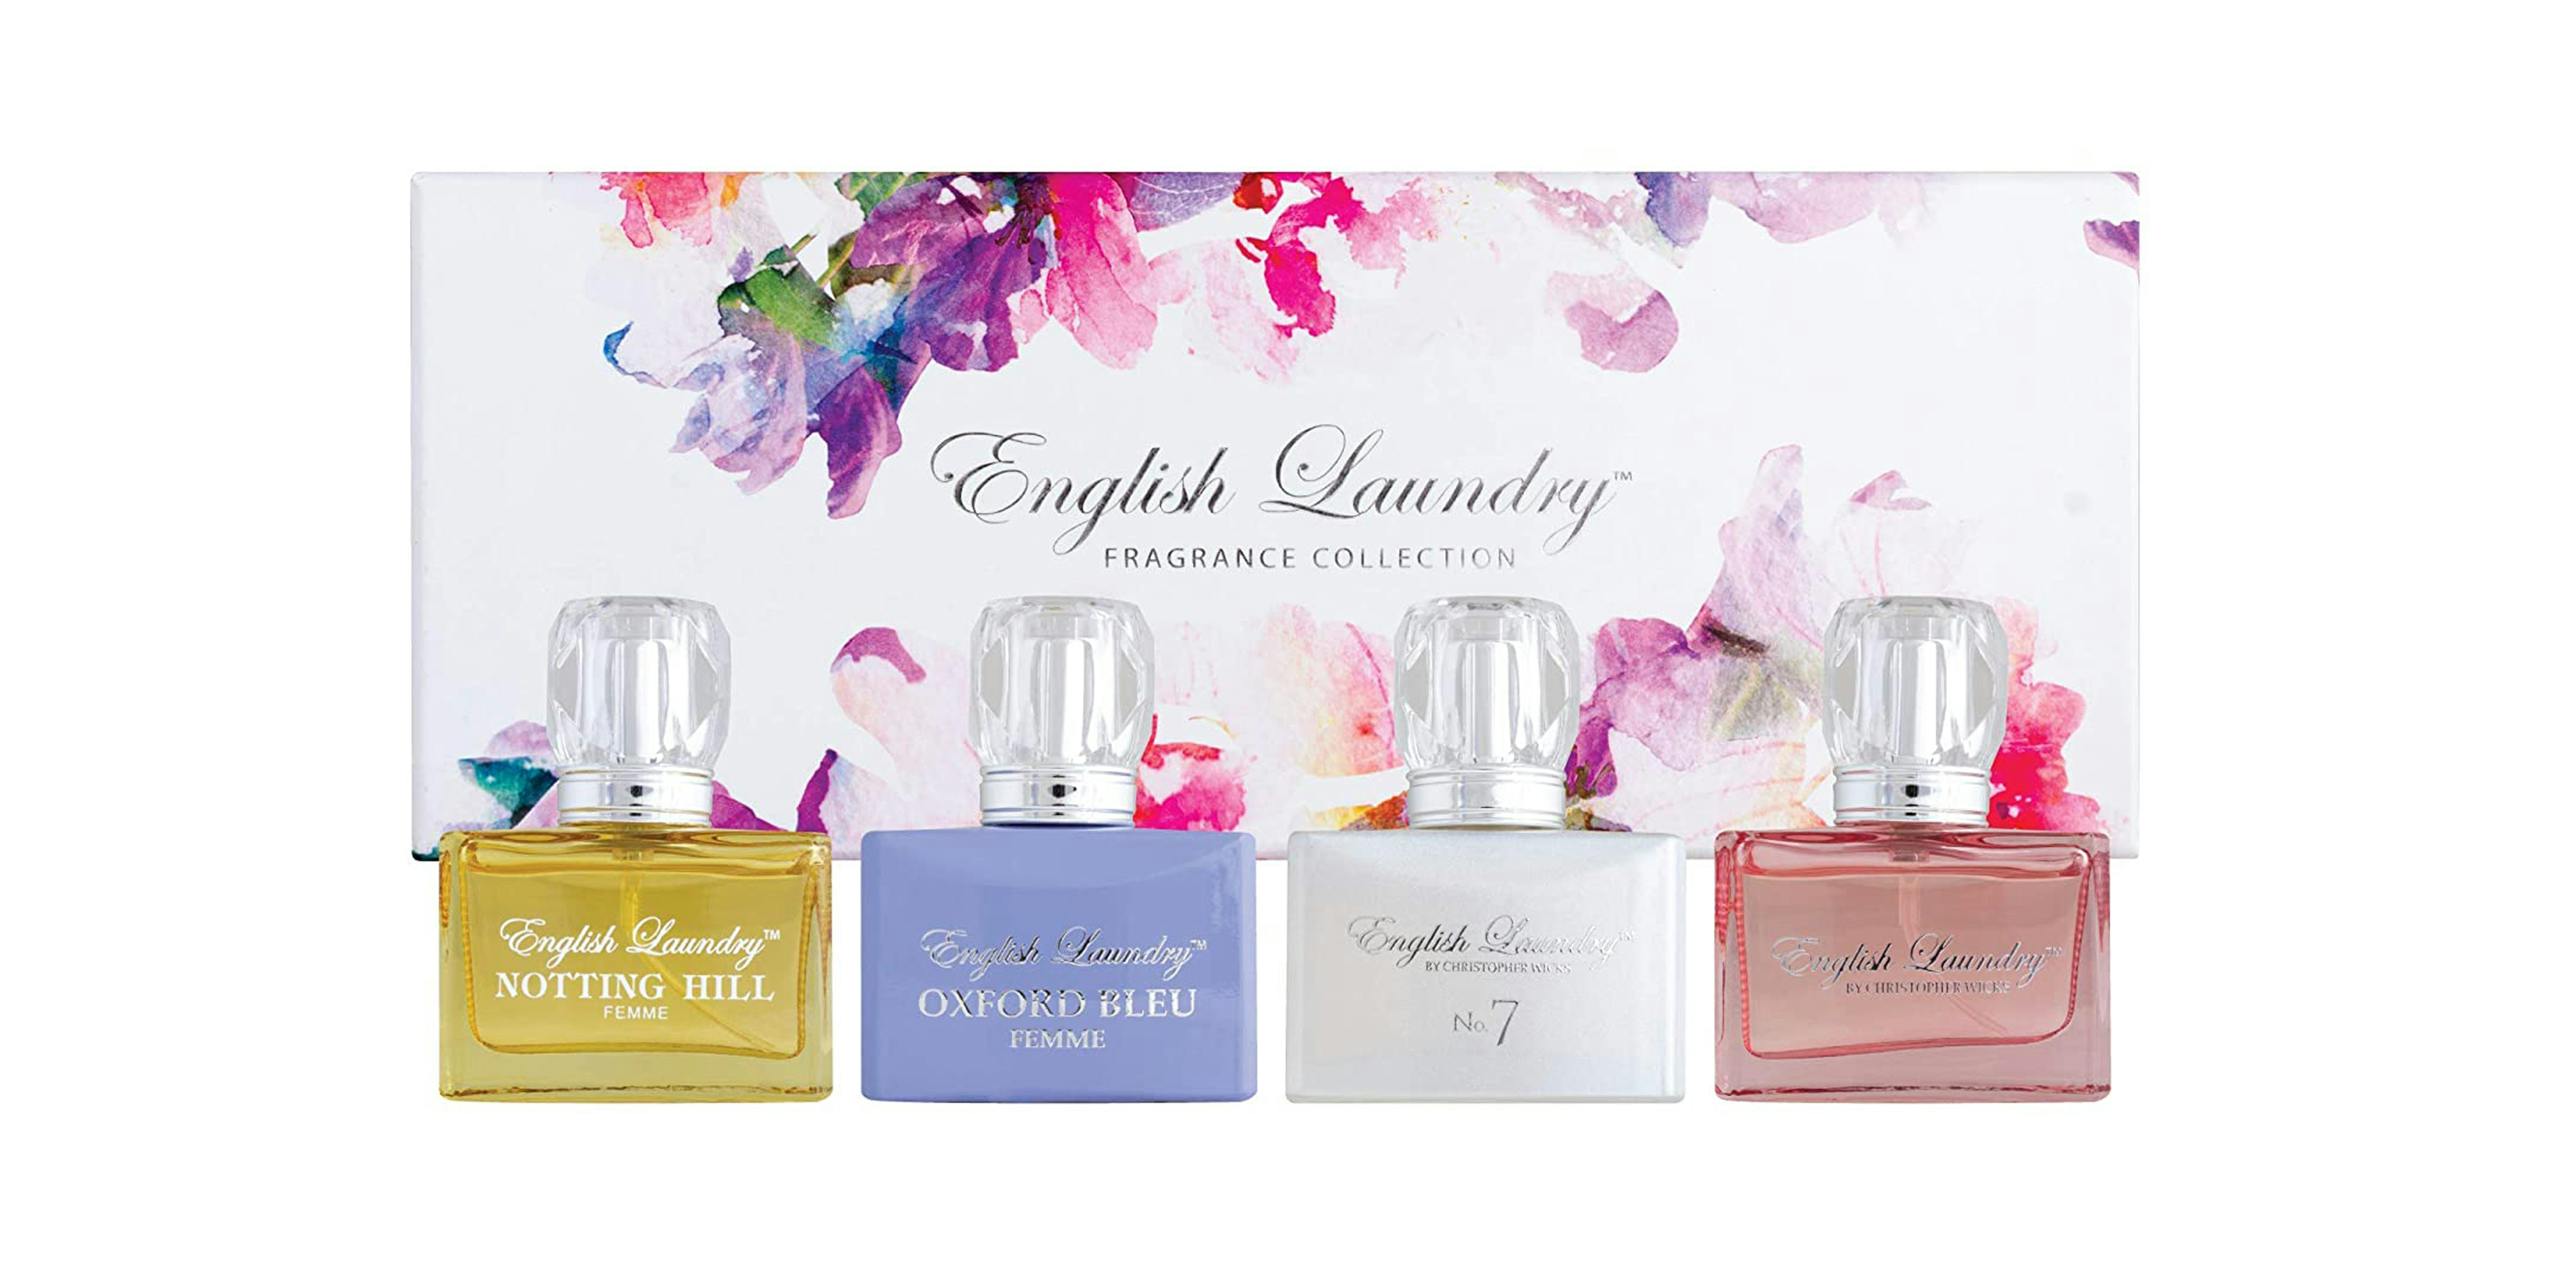 A selection of English Laundry perfumes.